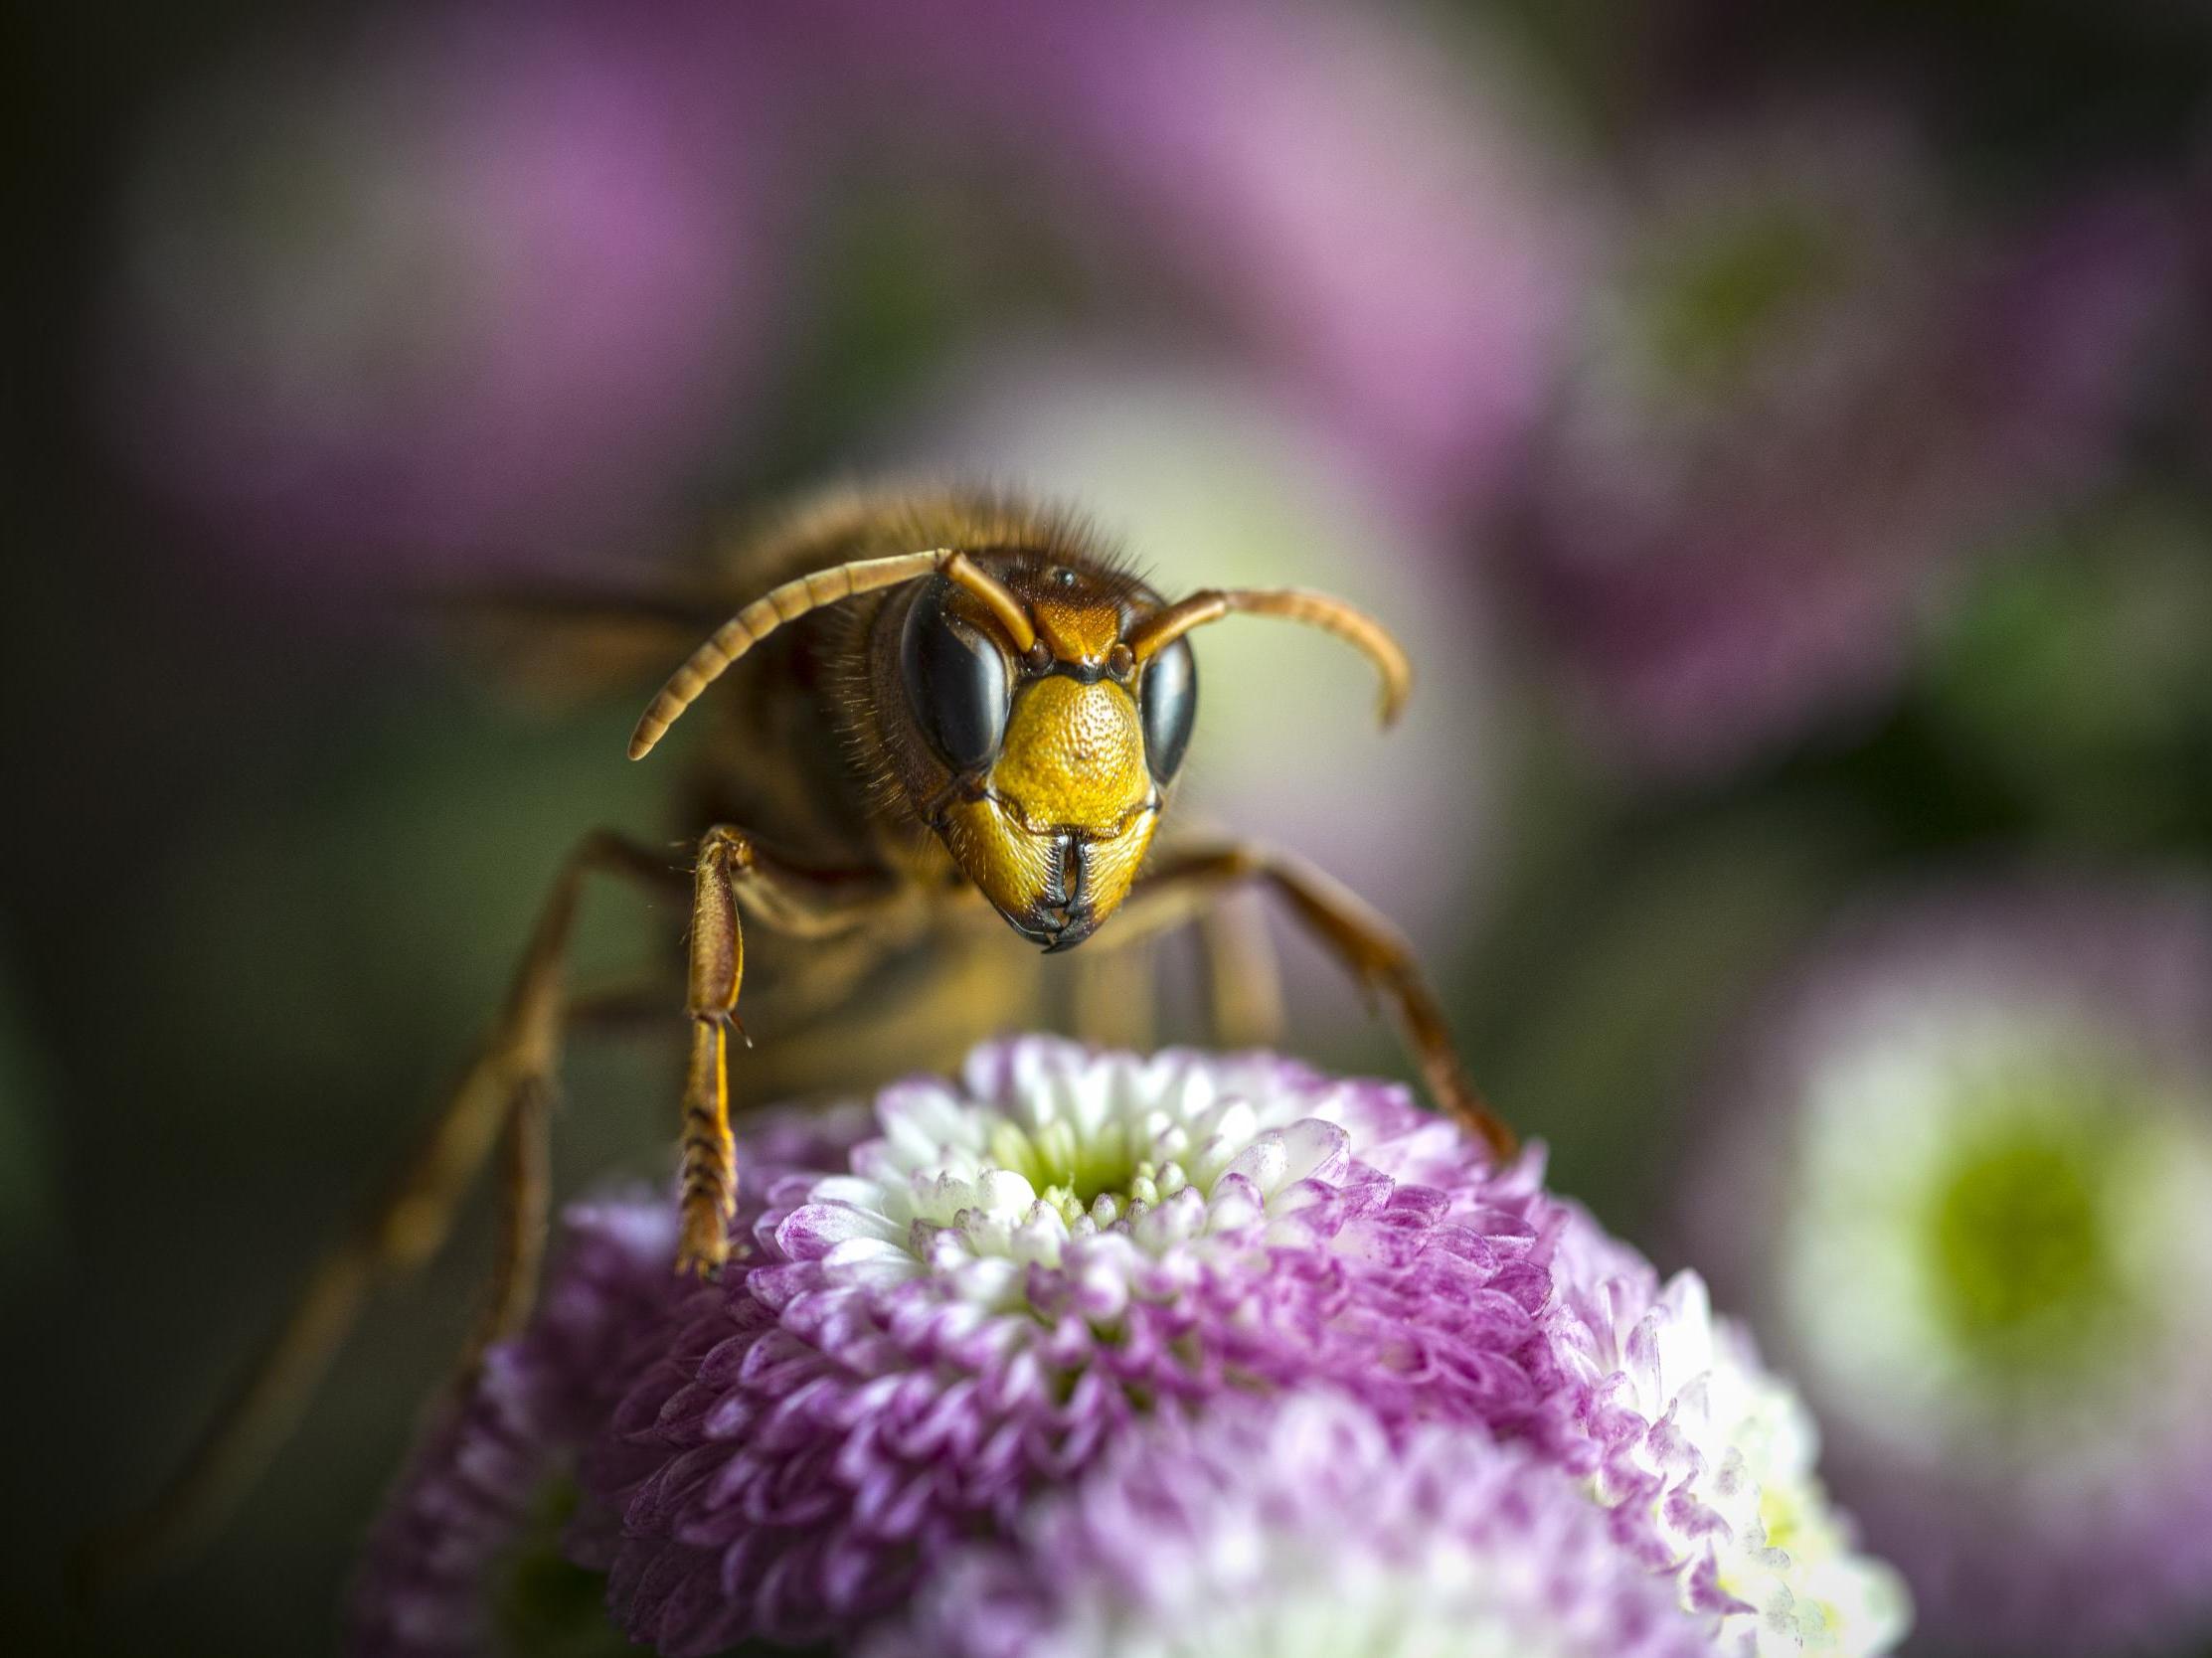 The UK is seeing the arrival of Asian hornets, which can cause anaphylactic shock